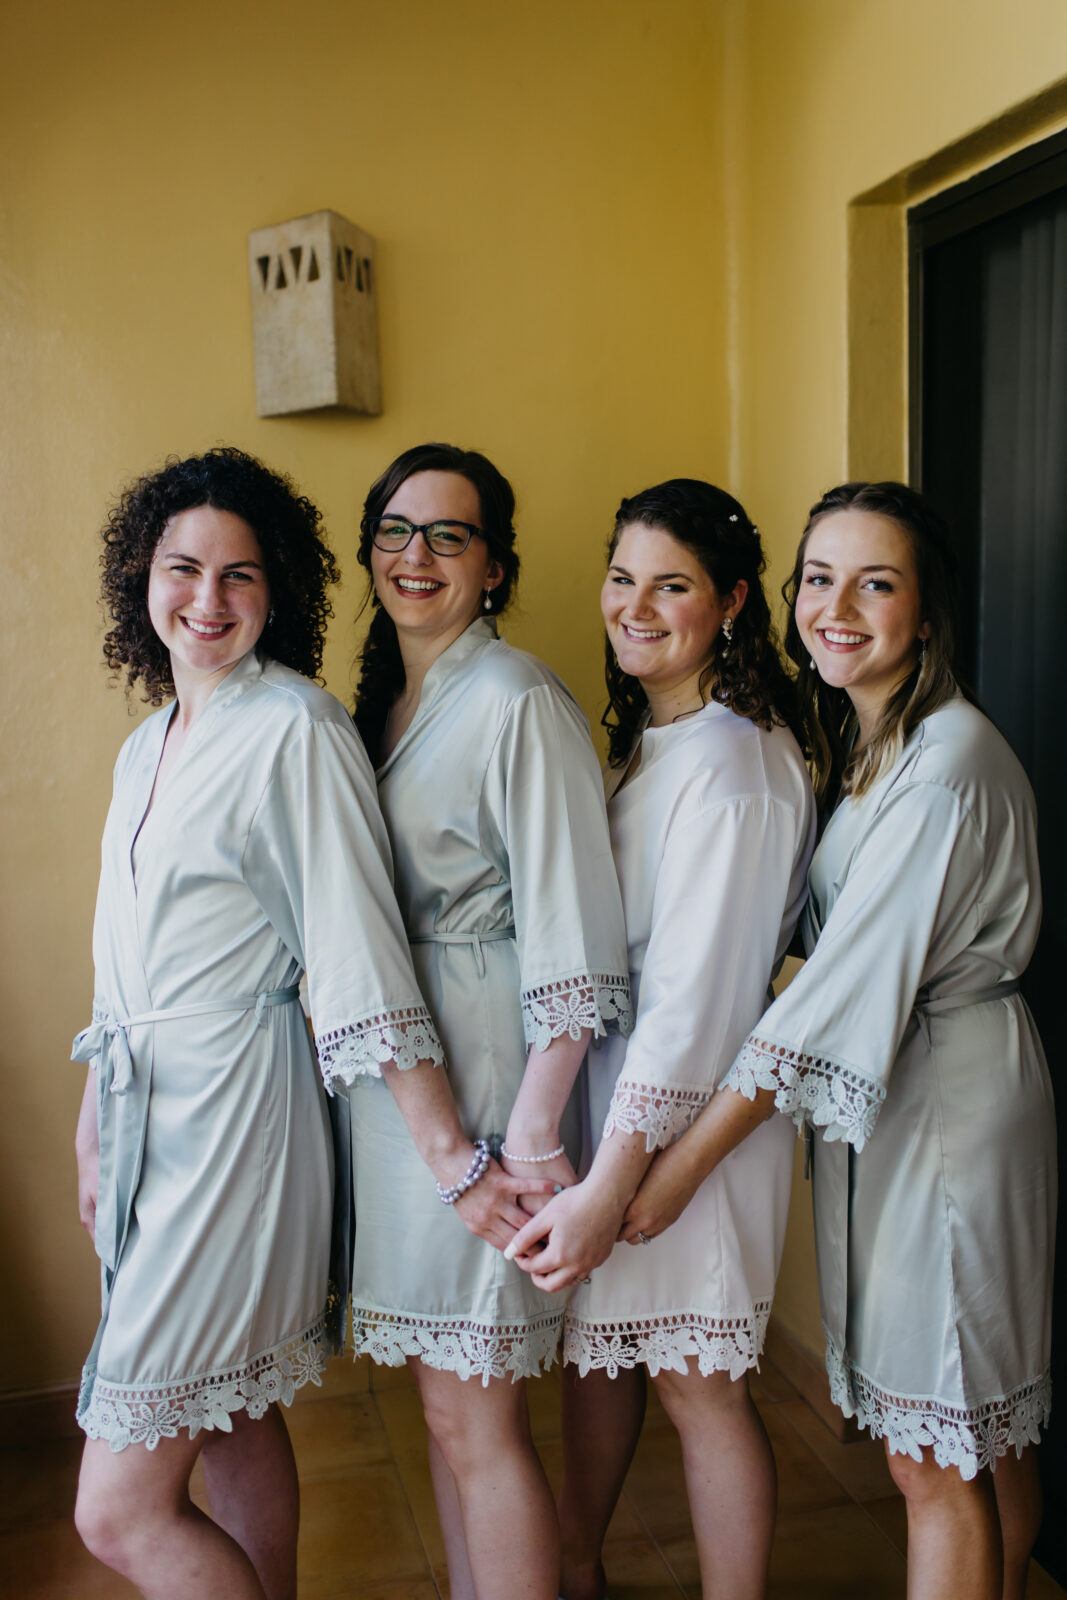 A photo of the bride and bridesmaids preparing